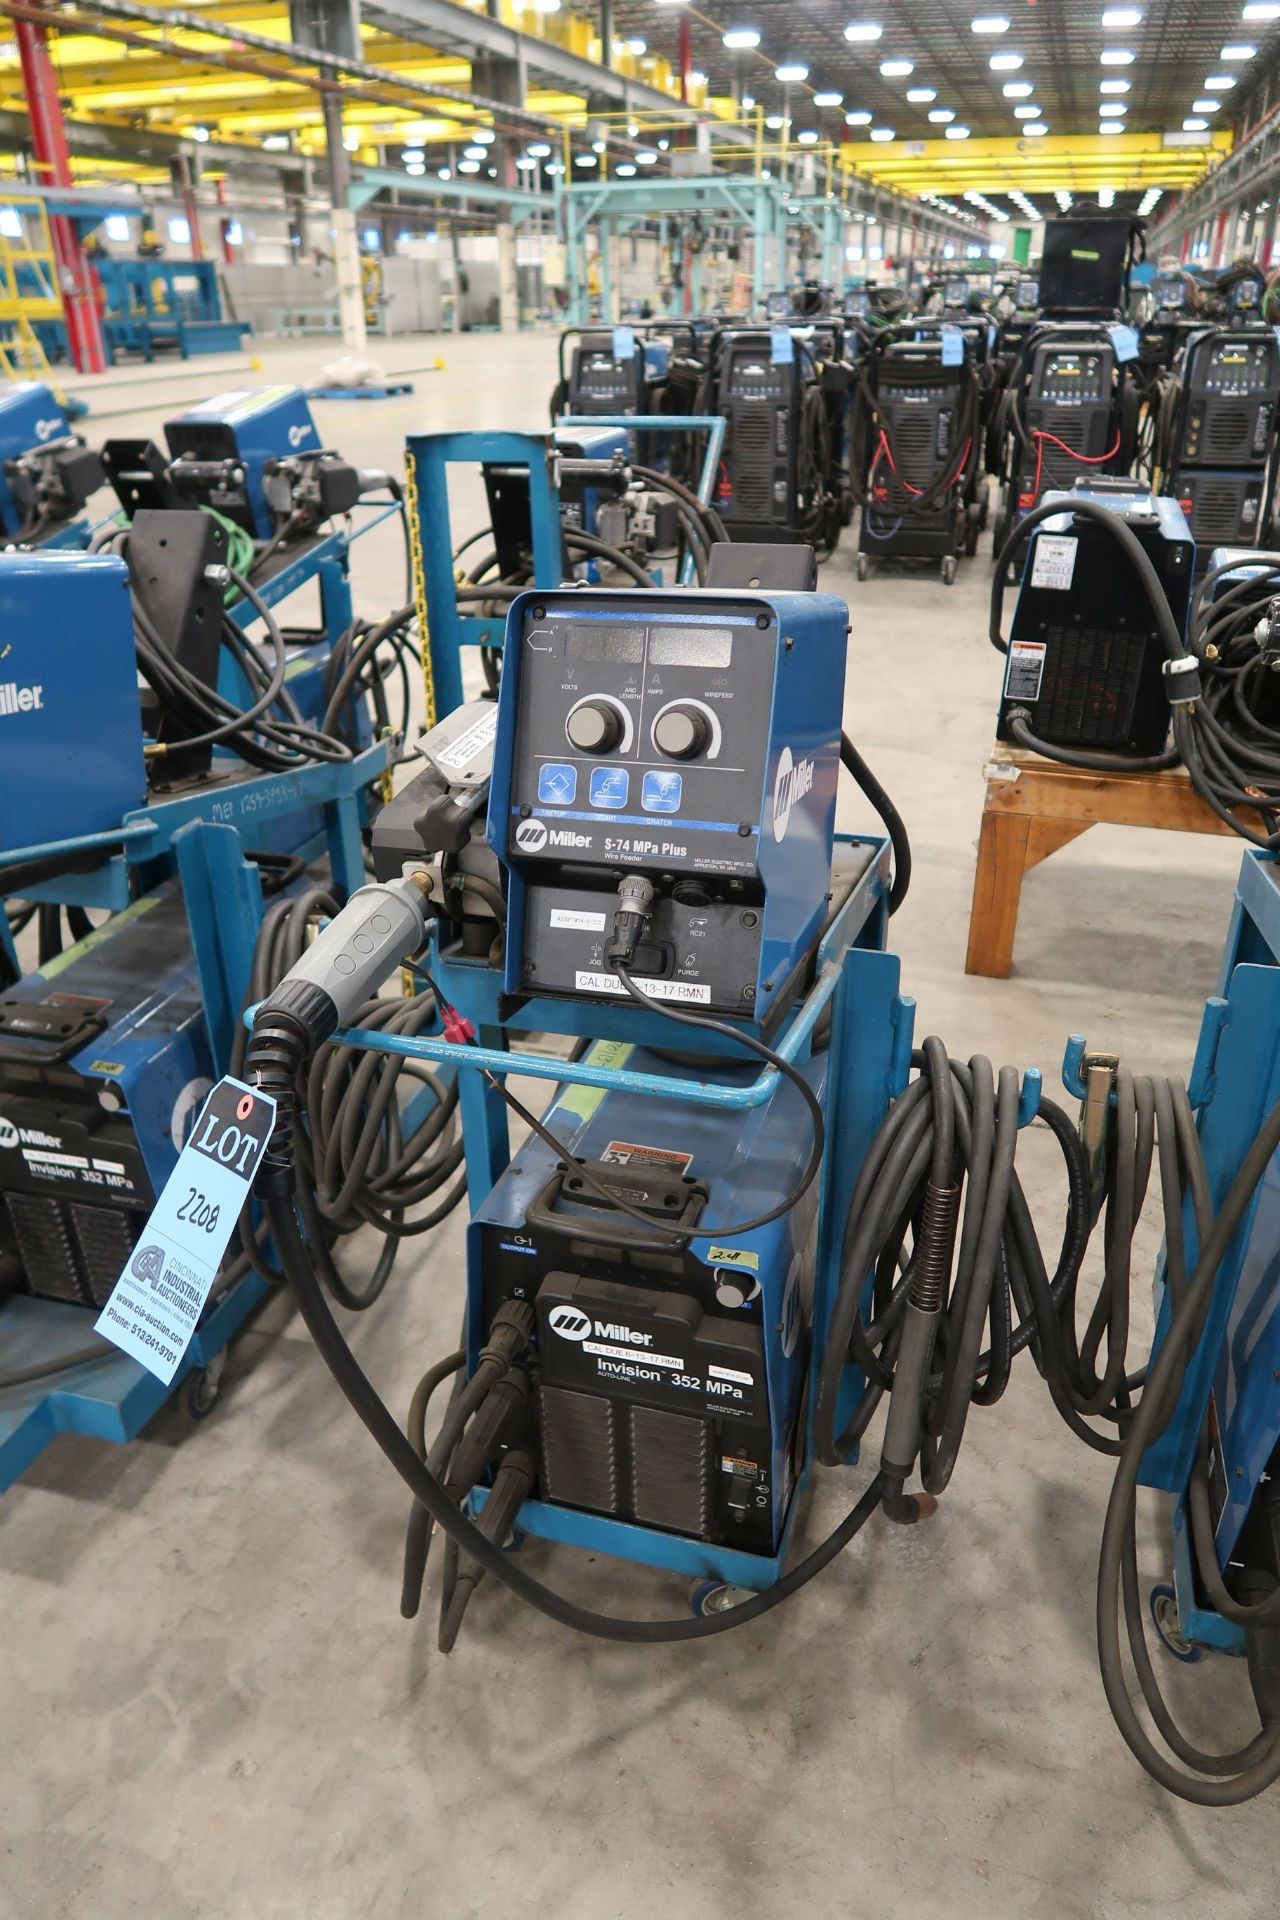 350 AMP MILLER INVISION 352 MPA WELDER WITH MILLER S-74 MPA PLUS WIRE FEEDER; FA 70113-07